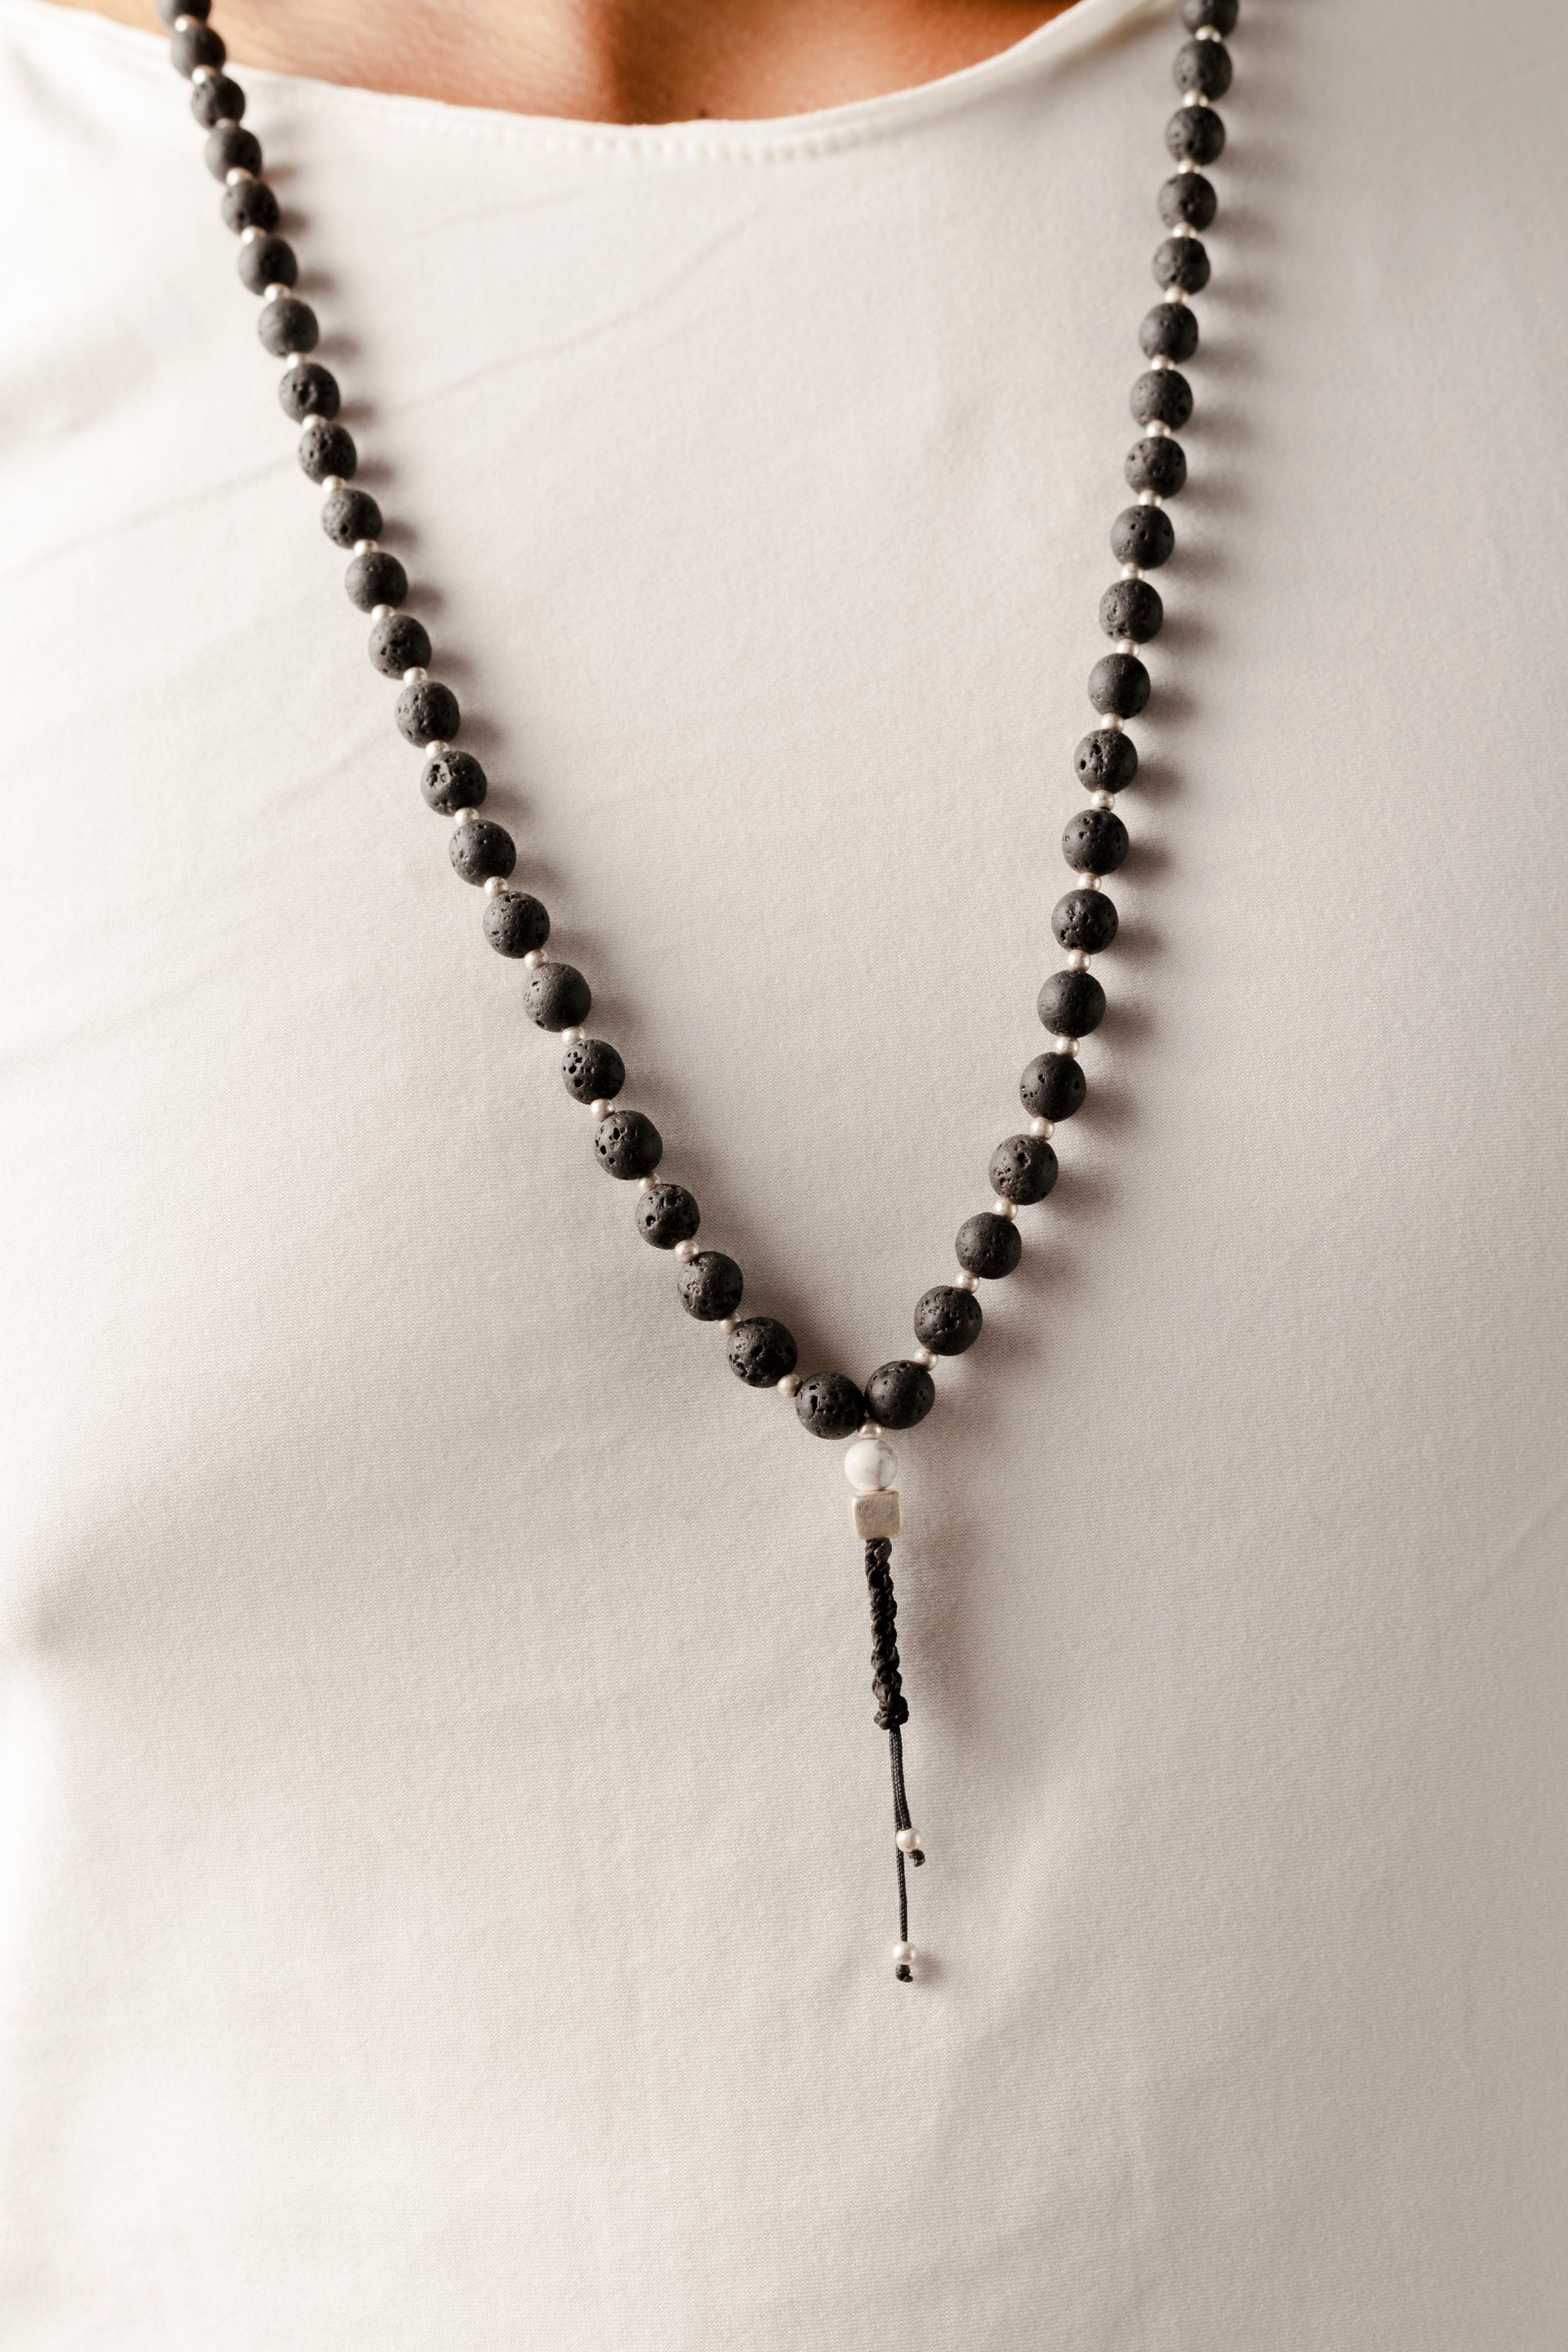 Mala beads necklace with Lava stone, Howlita and Silver